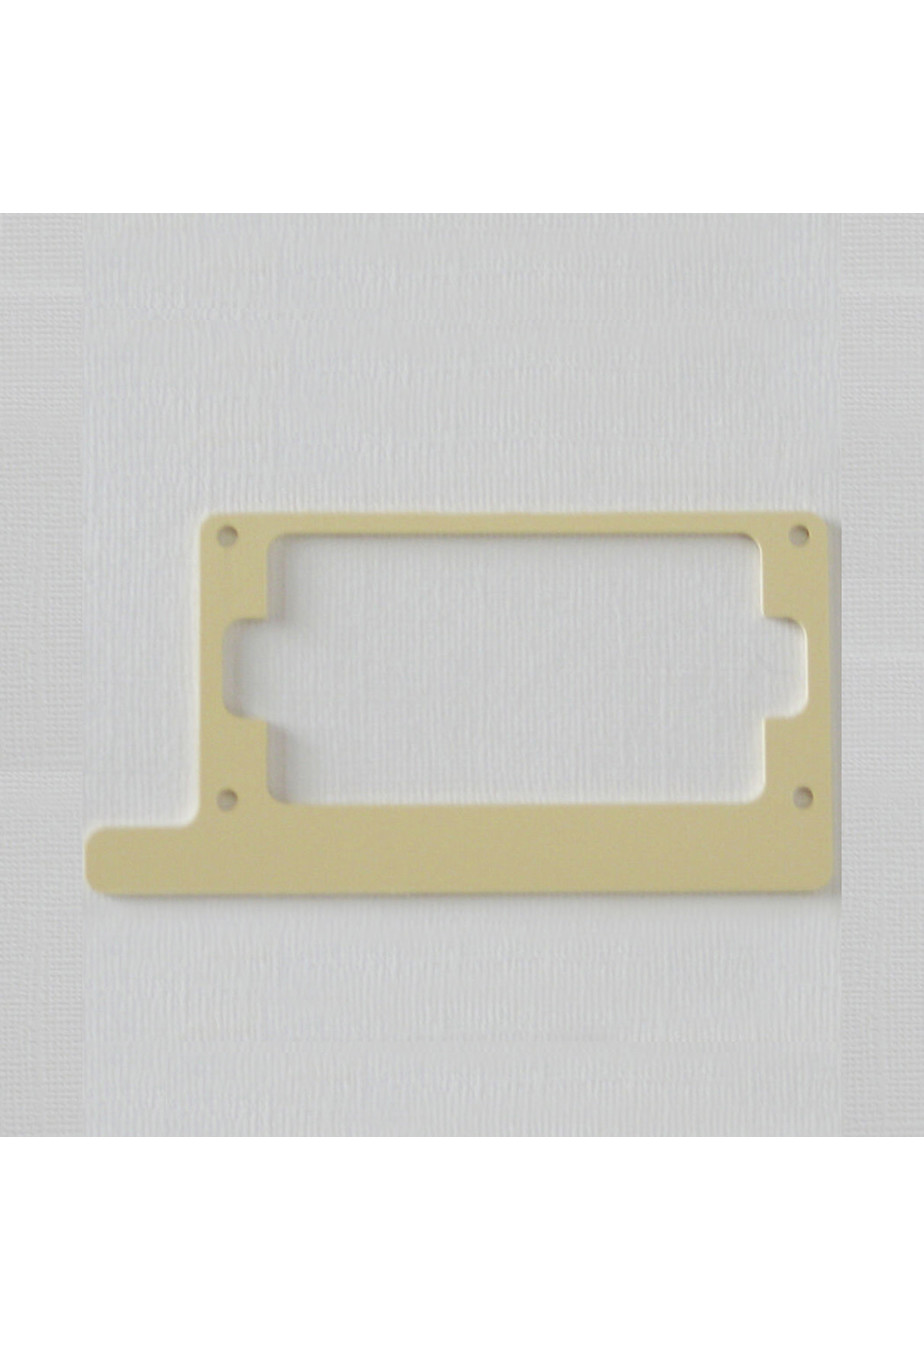 MannMade USA MannMade USA GK-3 Pickup Ring Adapter - Ivory